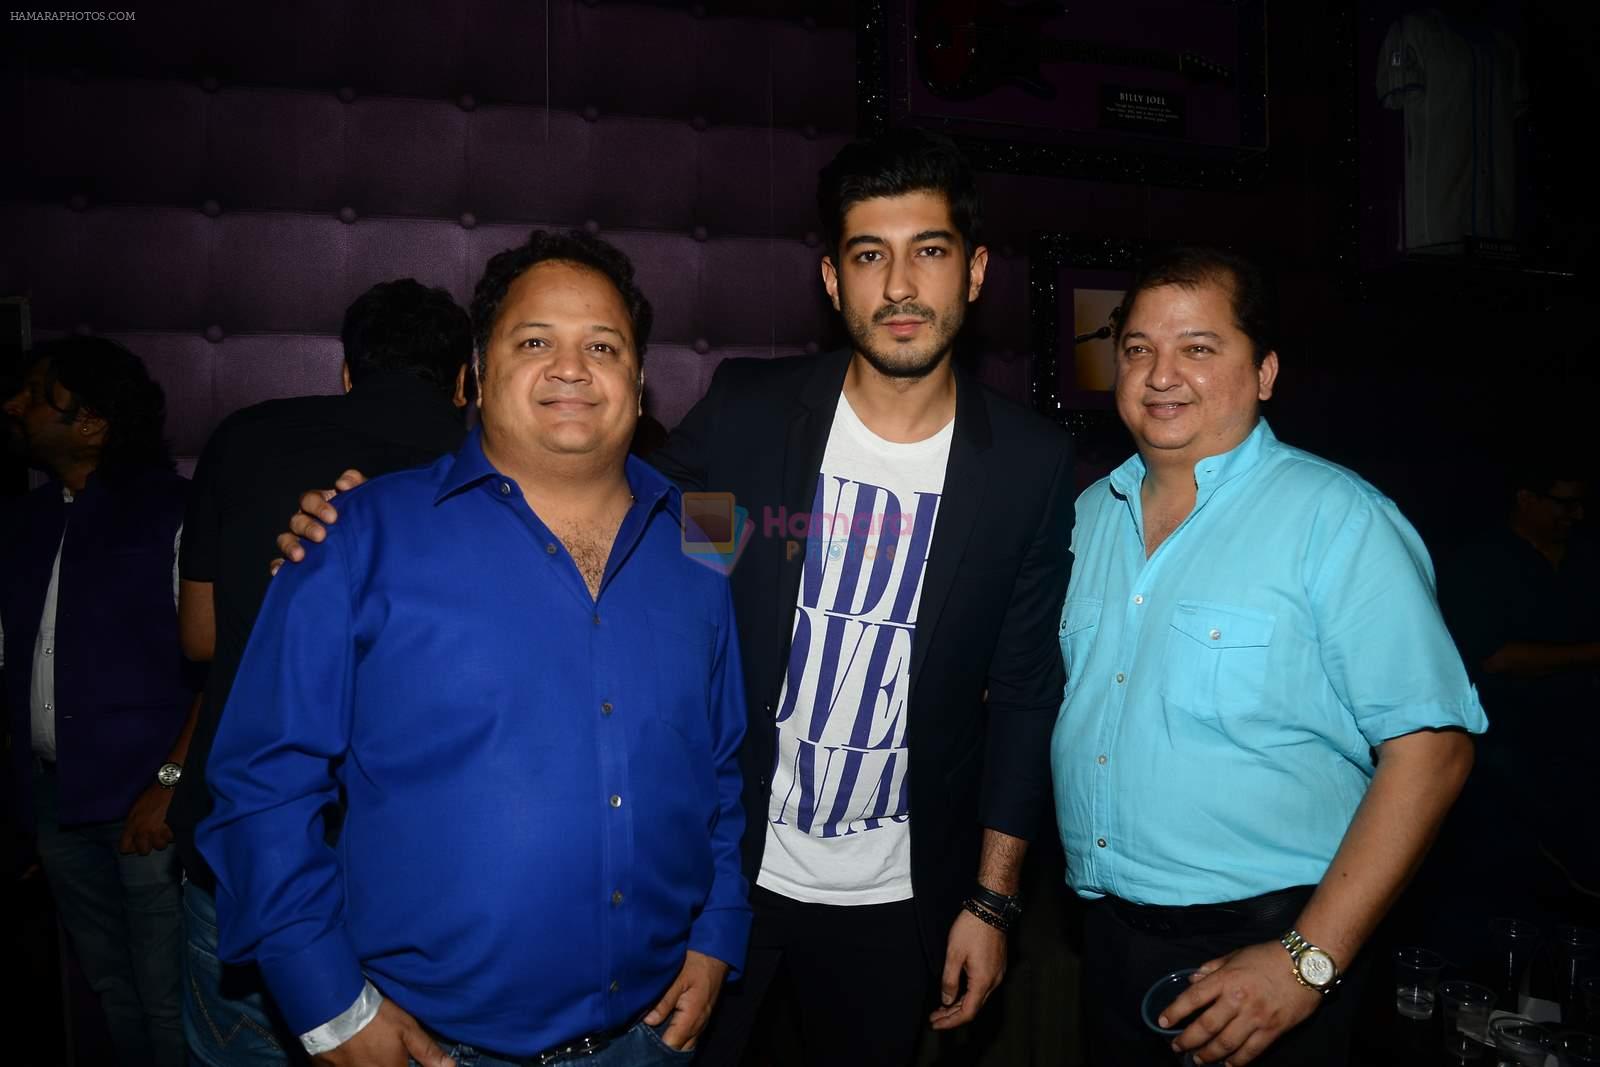 Mohit Marwah at Radio Mirchi Top 20 Awards in Hard Rock Cafe on 20th May 2015